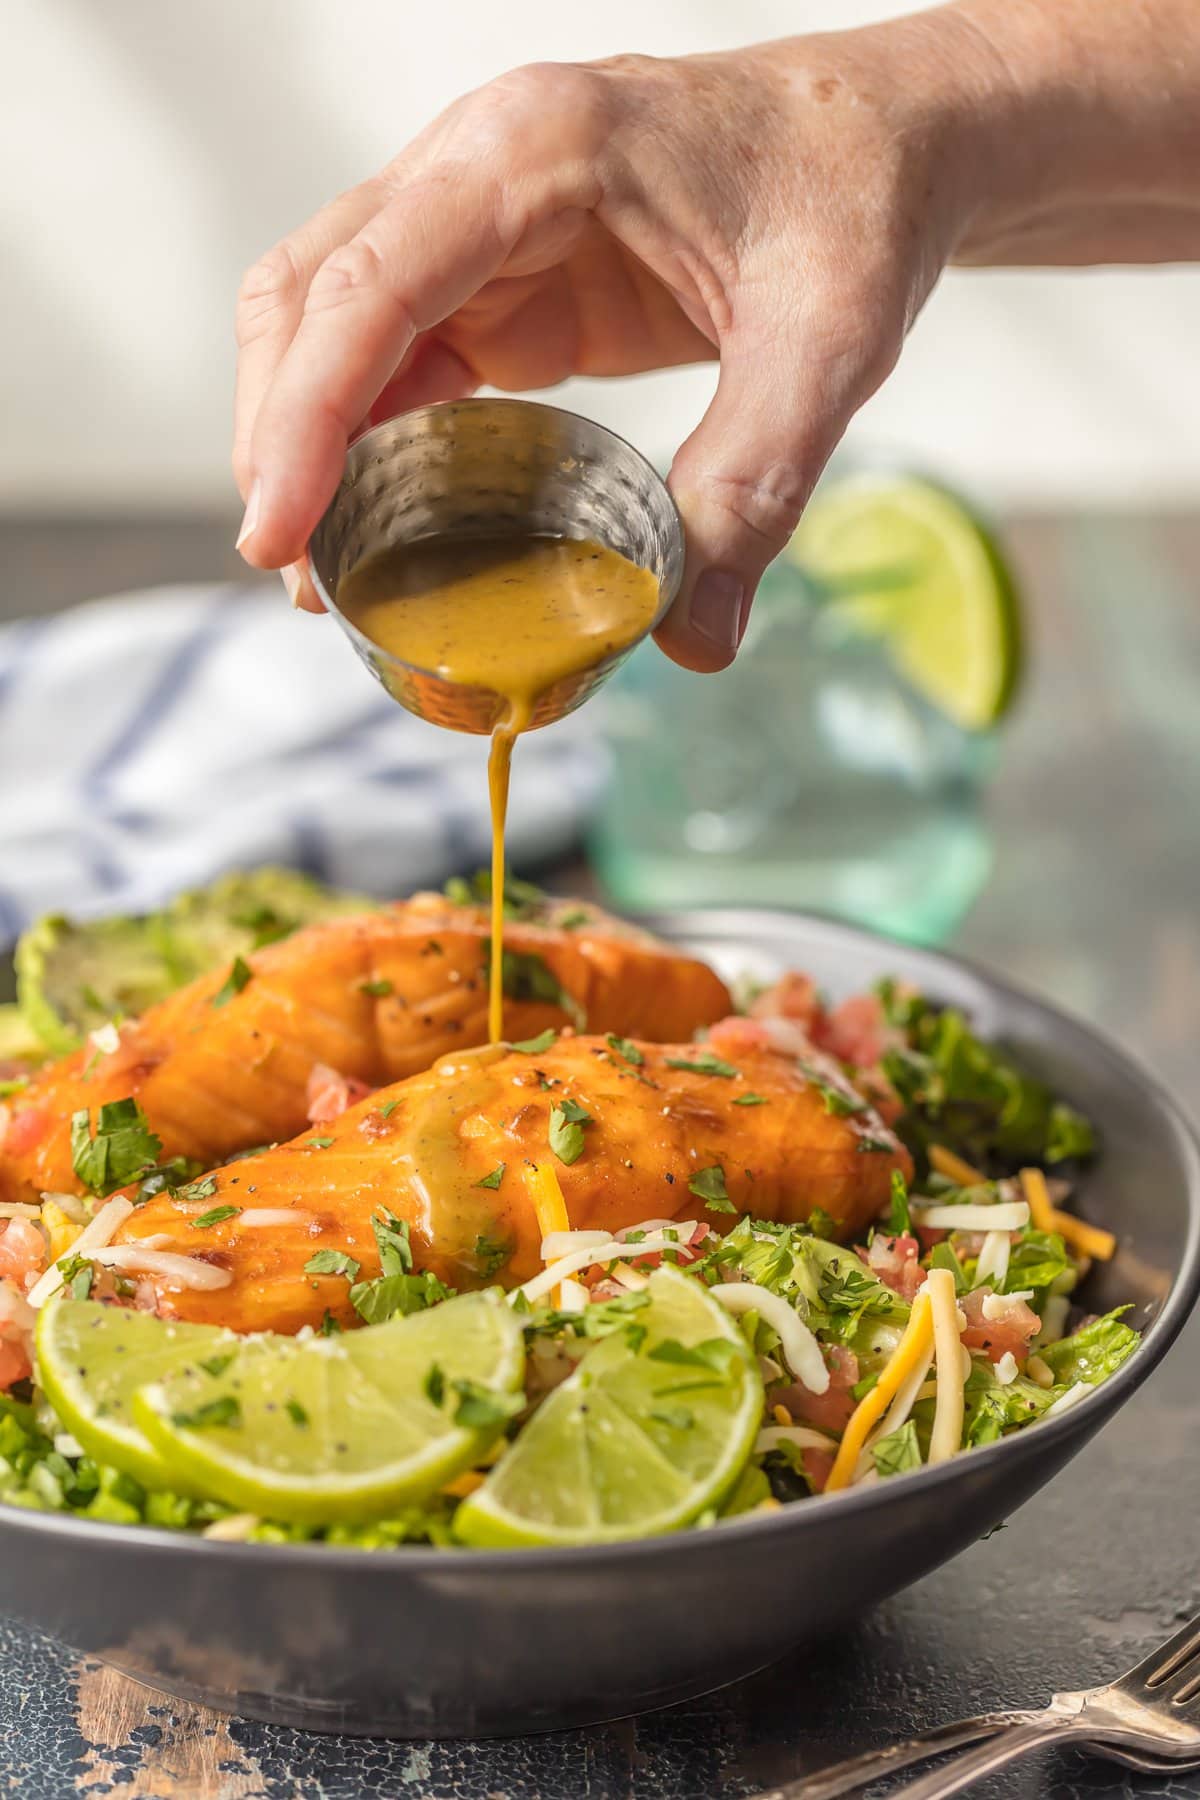 This TEQUILA LIME SALMON SALAD is the perfect hearty and delicious salad for any occasion! Salmon topped with a spicy tequila lime marinade and laid atop a bed of lettuce, corn, beans, avocado, pico, and more! SO MUCH FLAVOR!